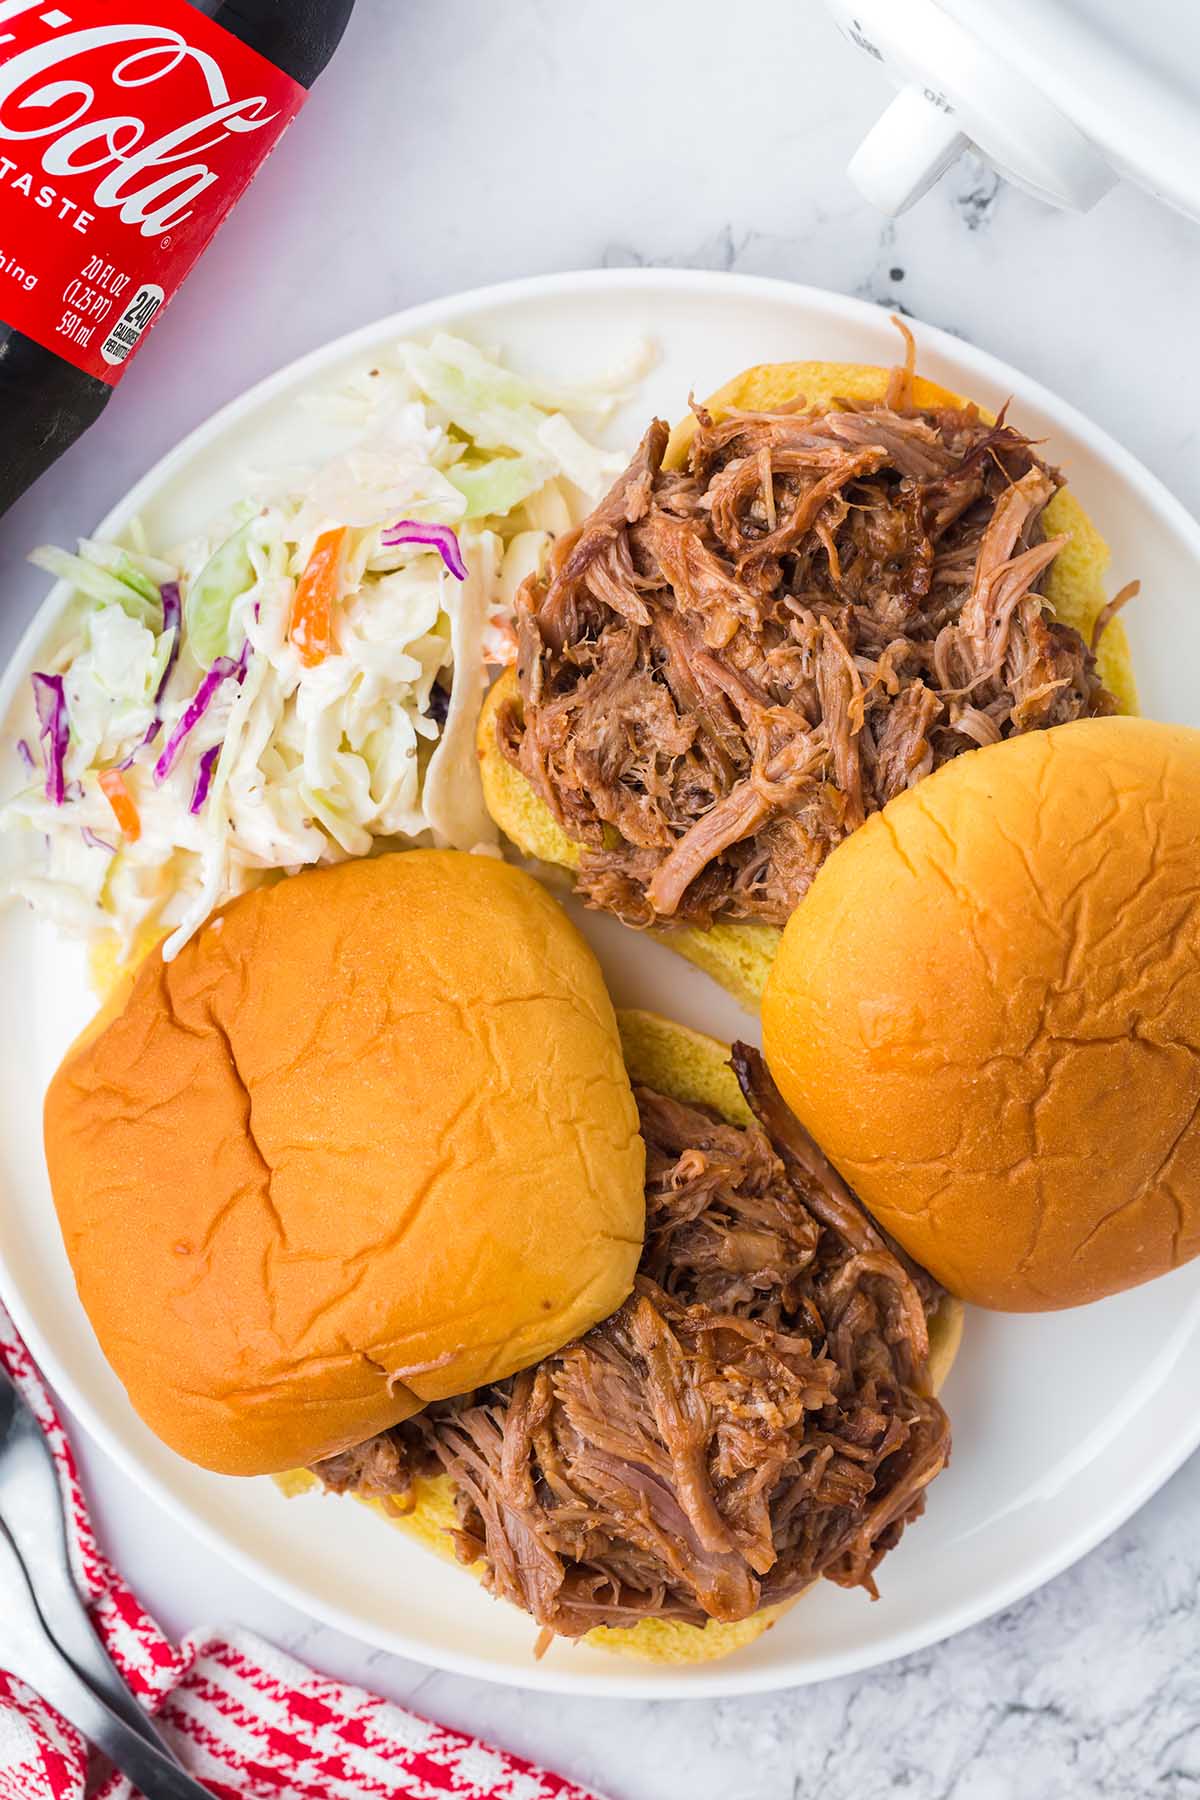 Crockpot Coca-Cola Pulled Pork inside buns on a plate with coleslaw.